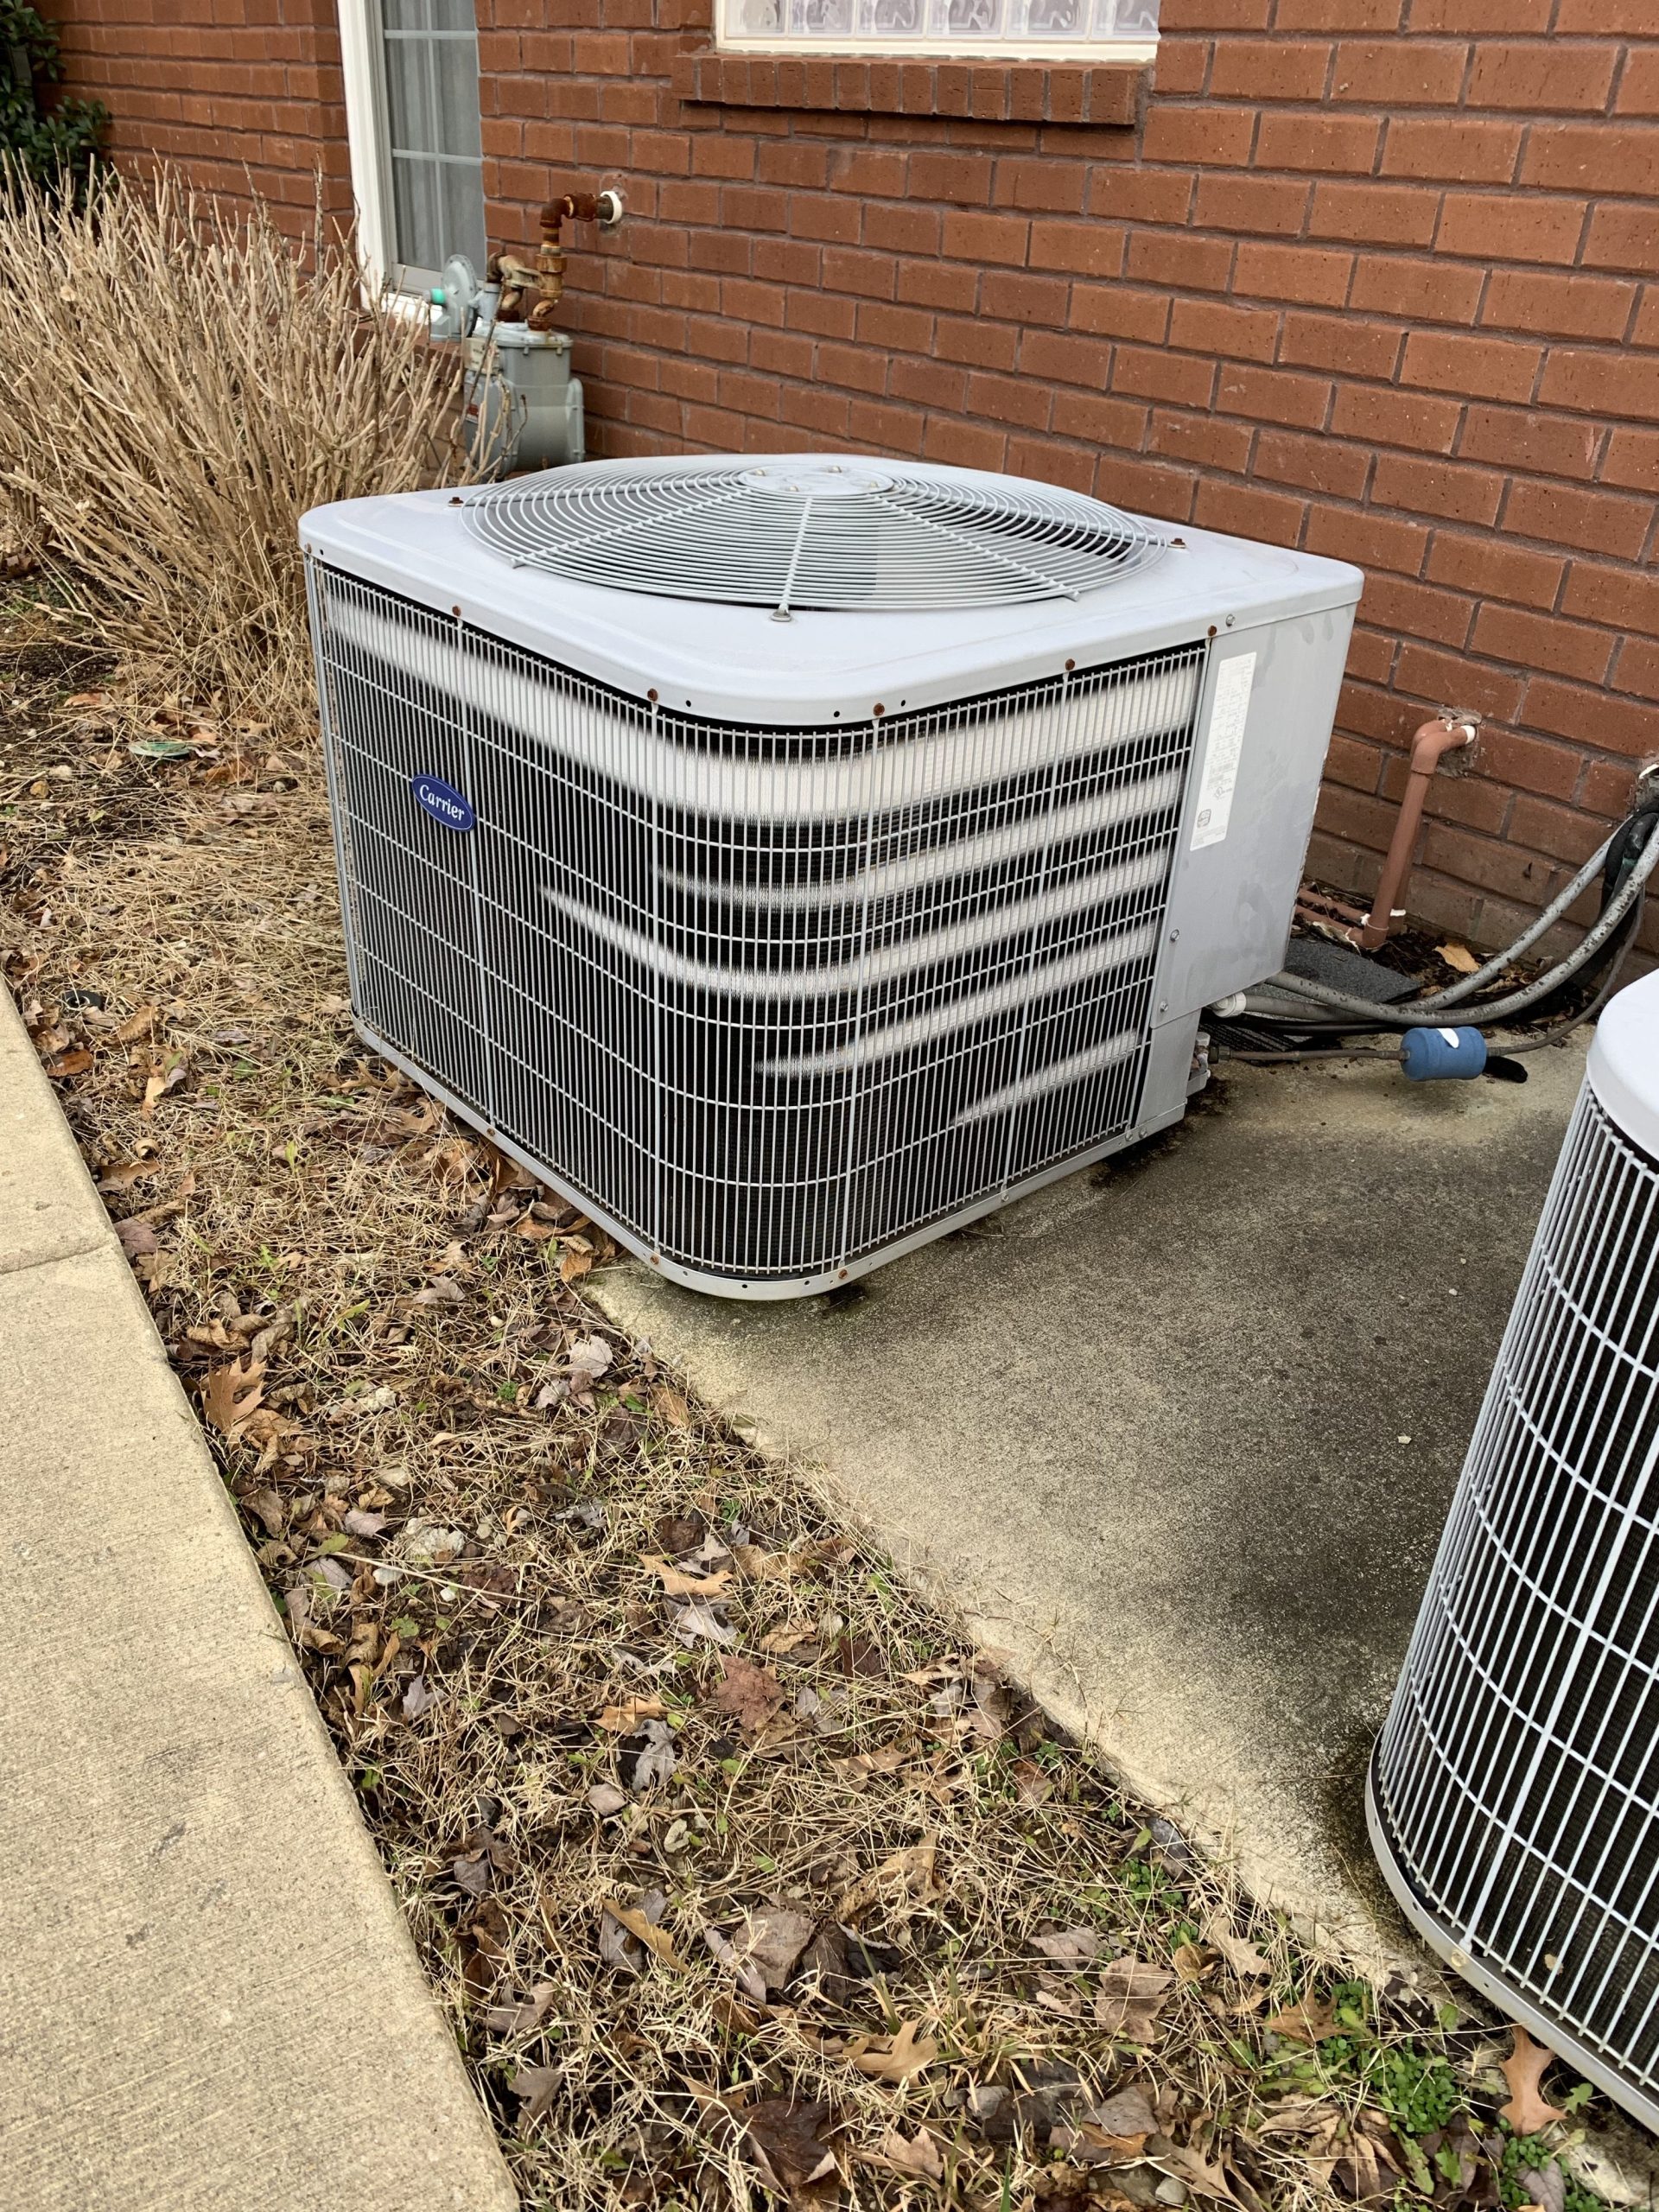 Why is My Air Conditioner Freezing Up? How do I fix it?